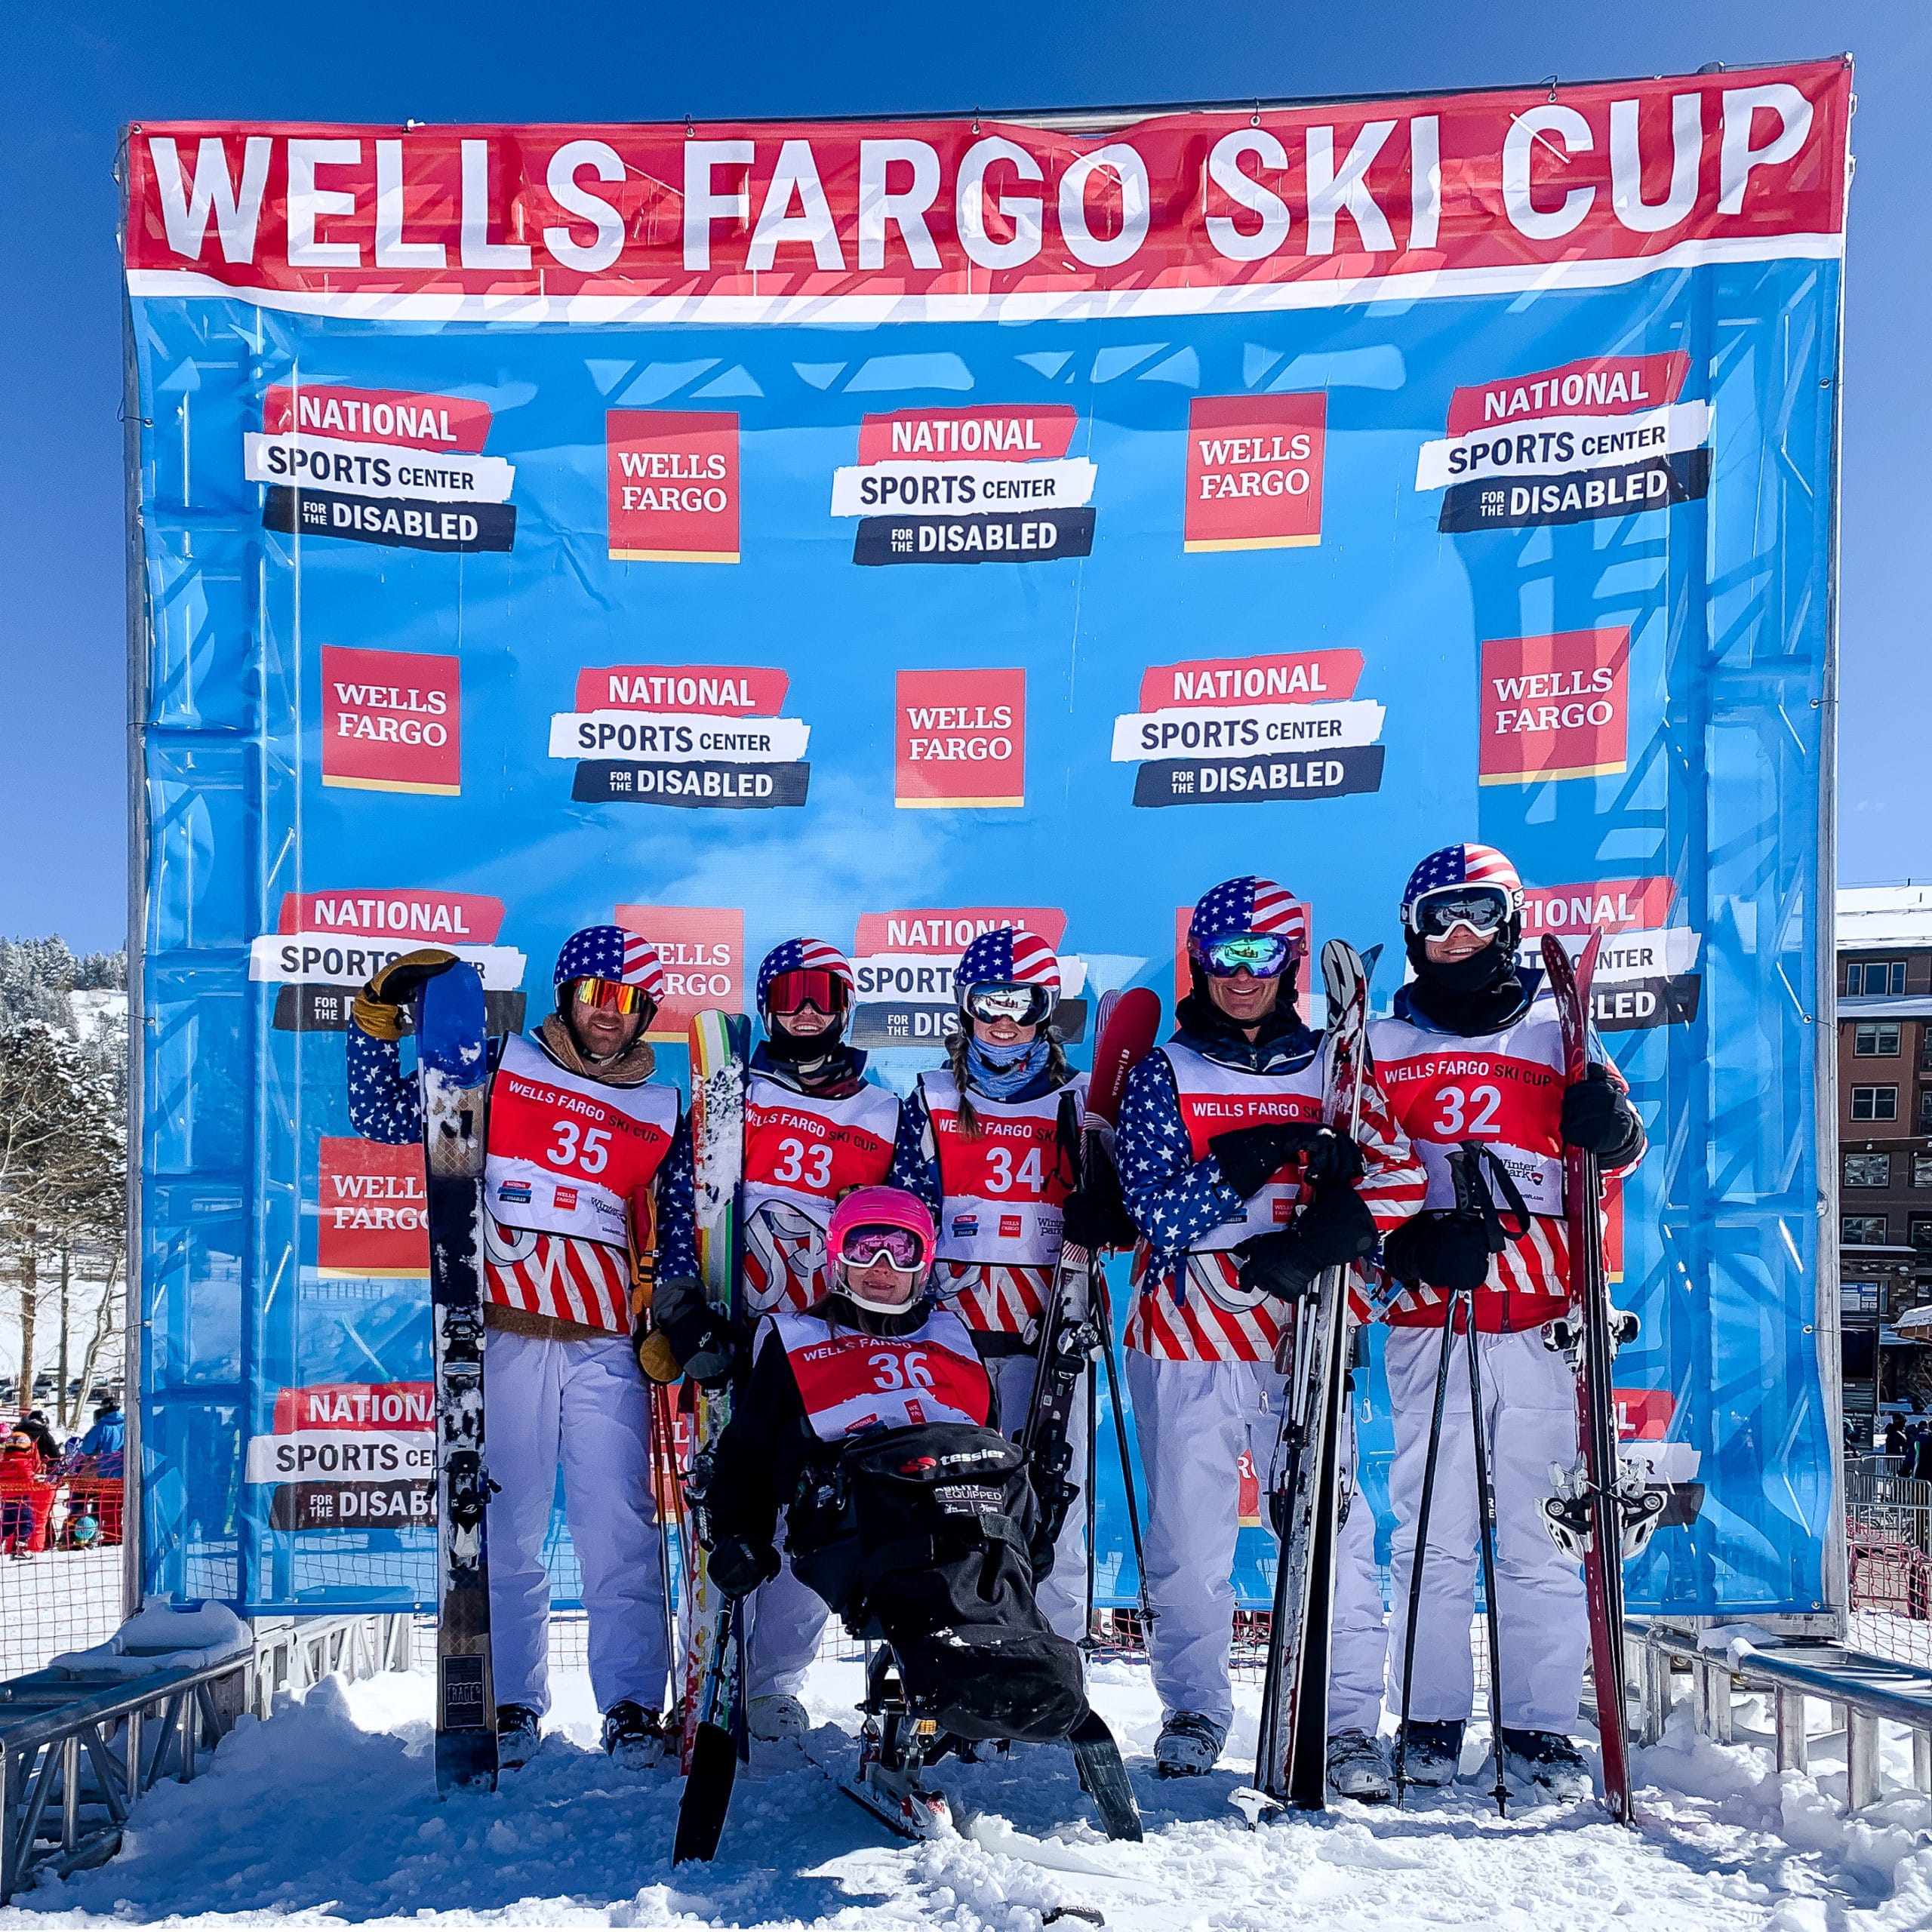 46th Annual Wells Fargo Ski Cup Galloway Architecture, Engineering